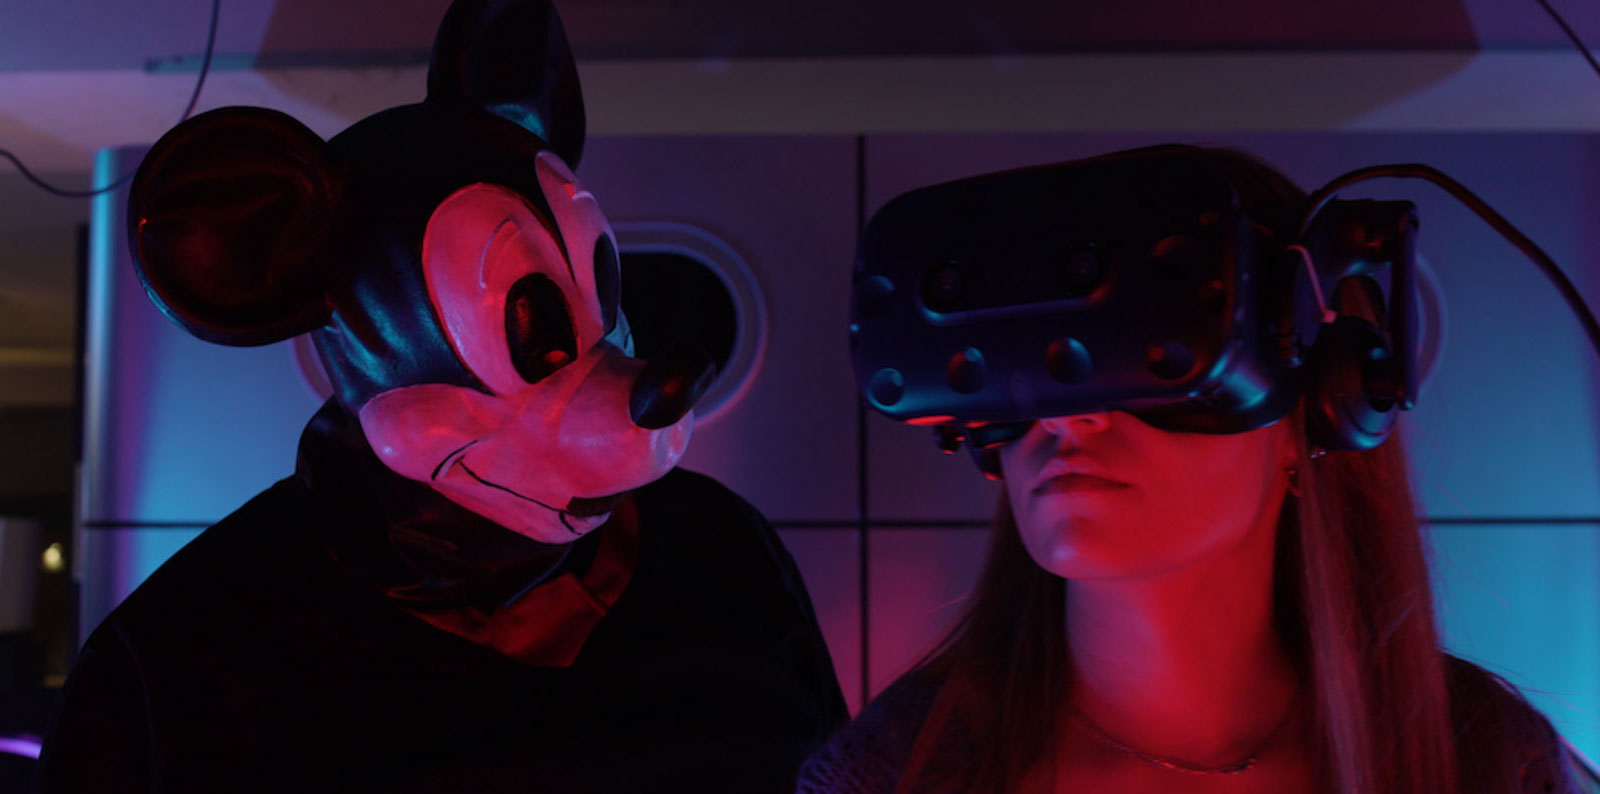 Mickey Mouse Unveiled as Masked Killer in New Movie Trailer